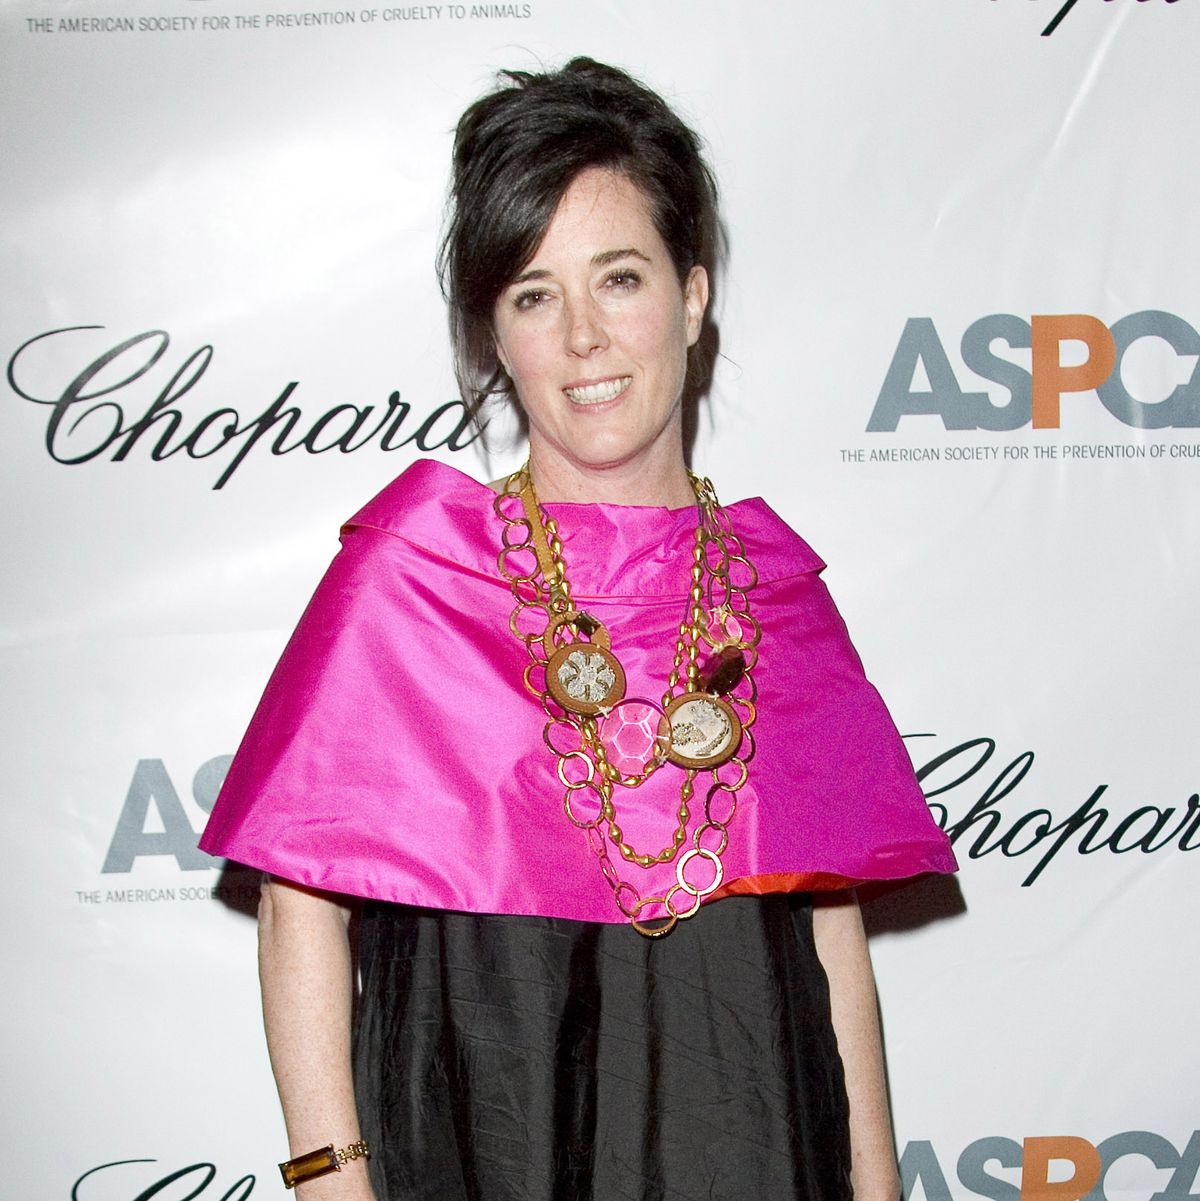 Ulta Beauty Apologizes for 'Insensitive' Kate Spade Email